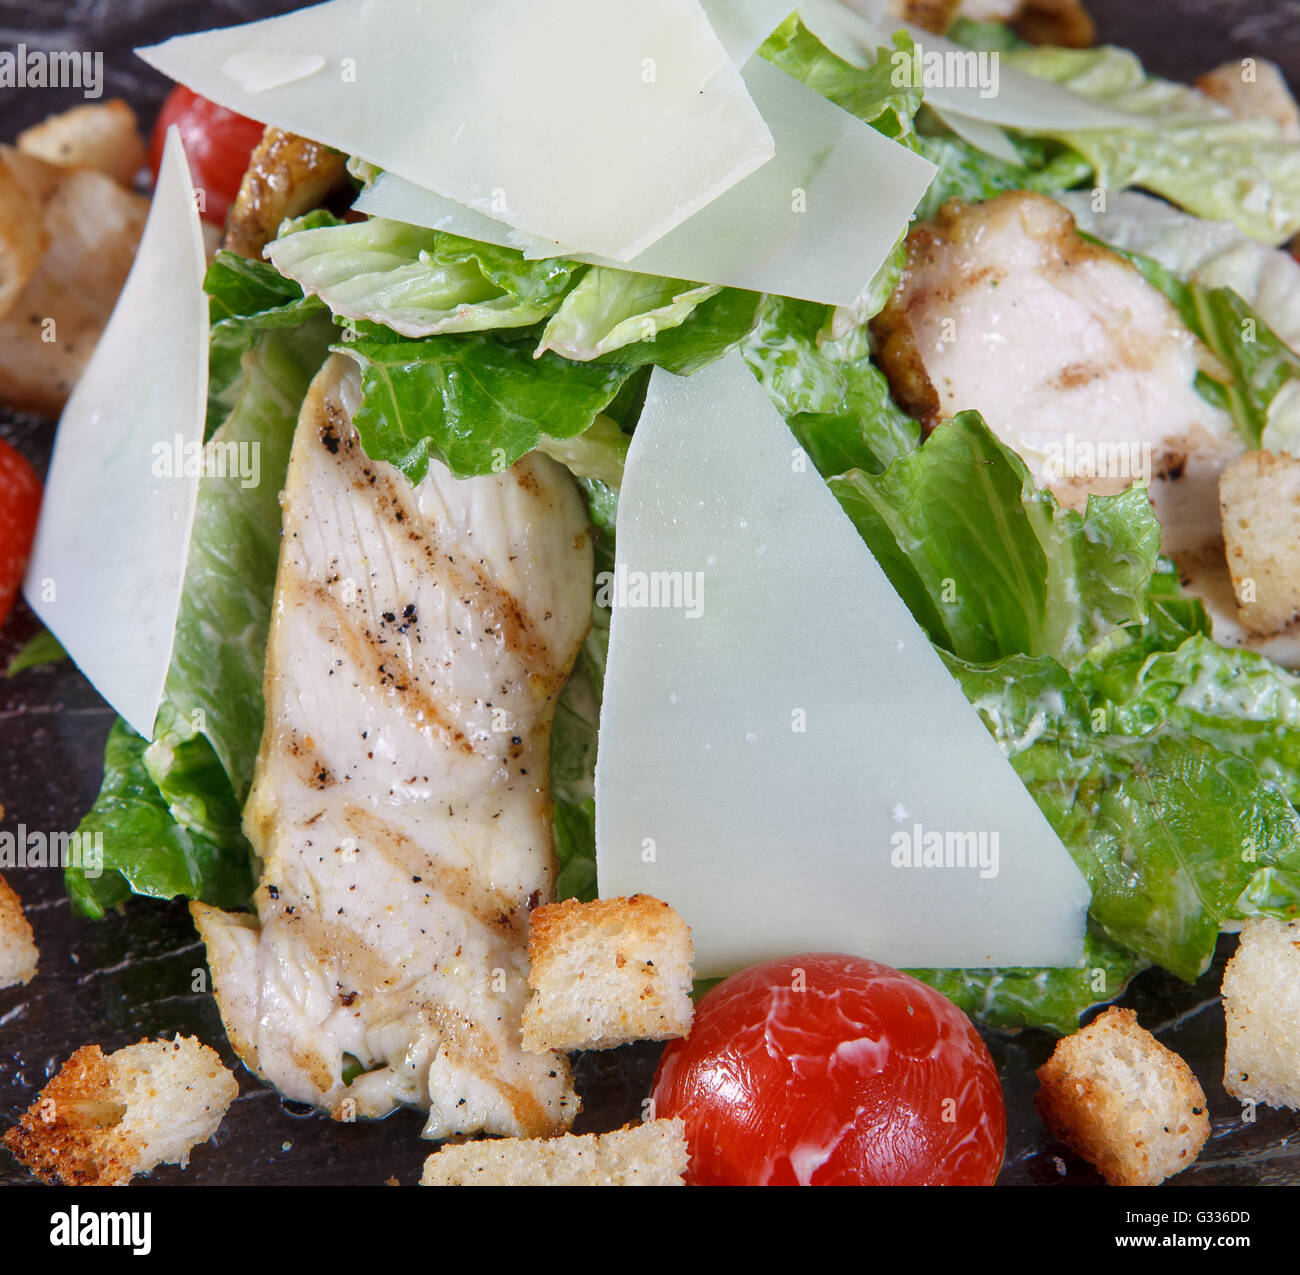 Macro fragment of salad with grilled chicken meat, lettuce, tomatoes and croutons.  Glass dish on a brown wooden Stock Photo